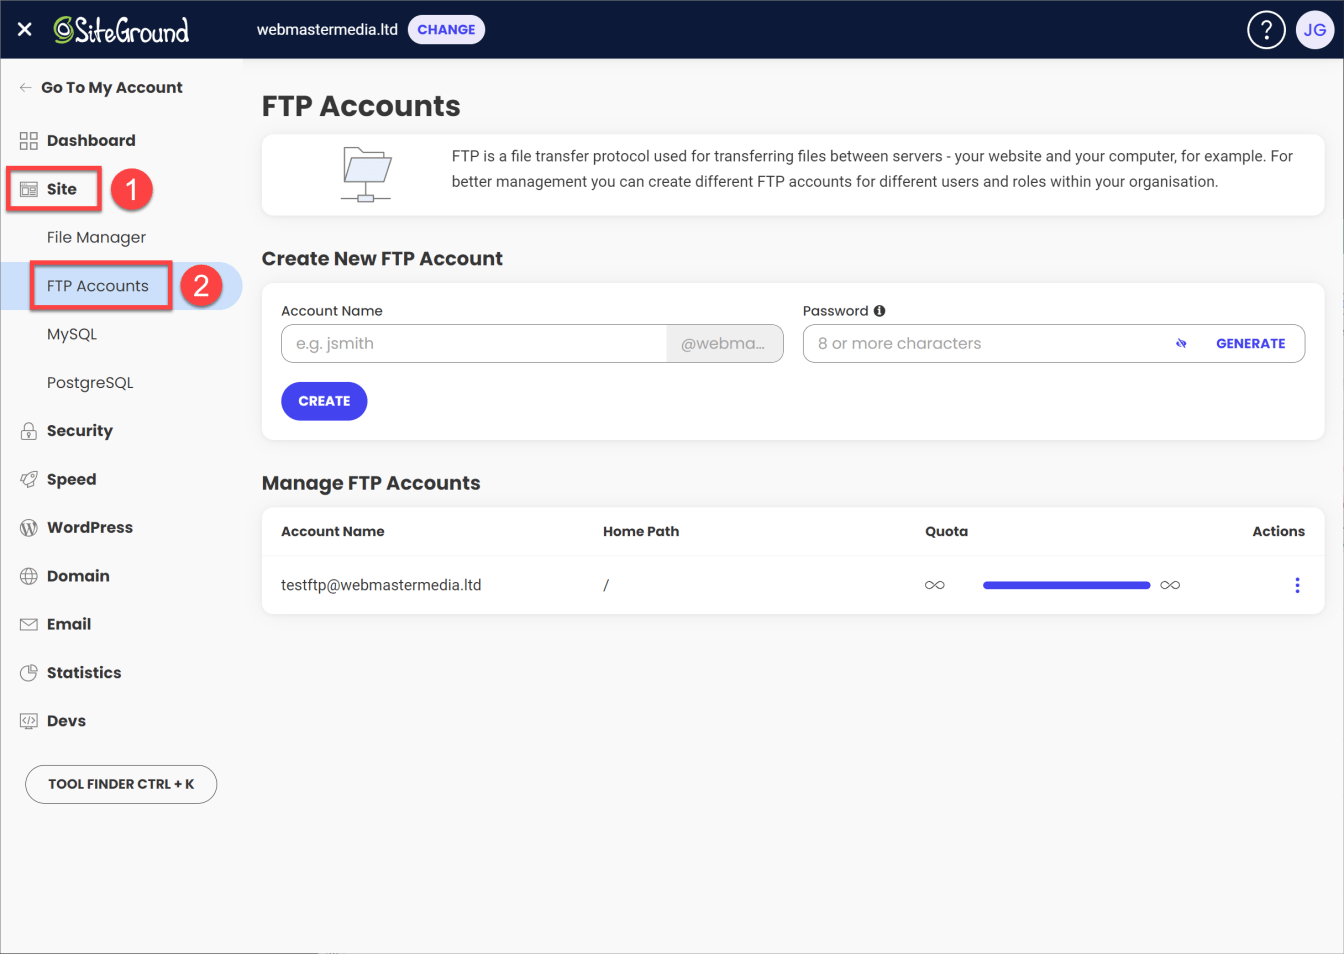 Navigate to the FTP Accounts section of your Site Tools dashboard.